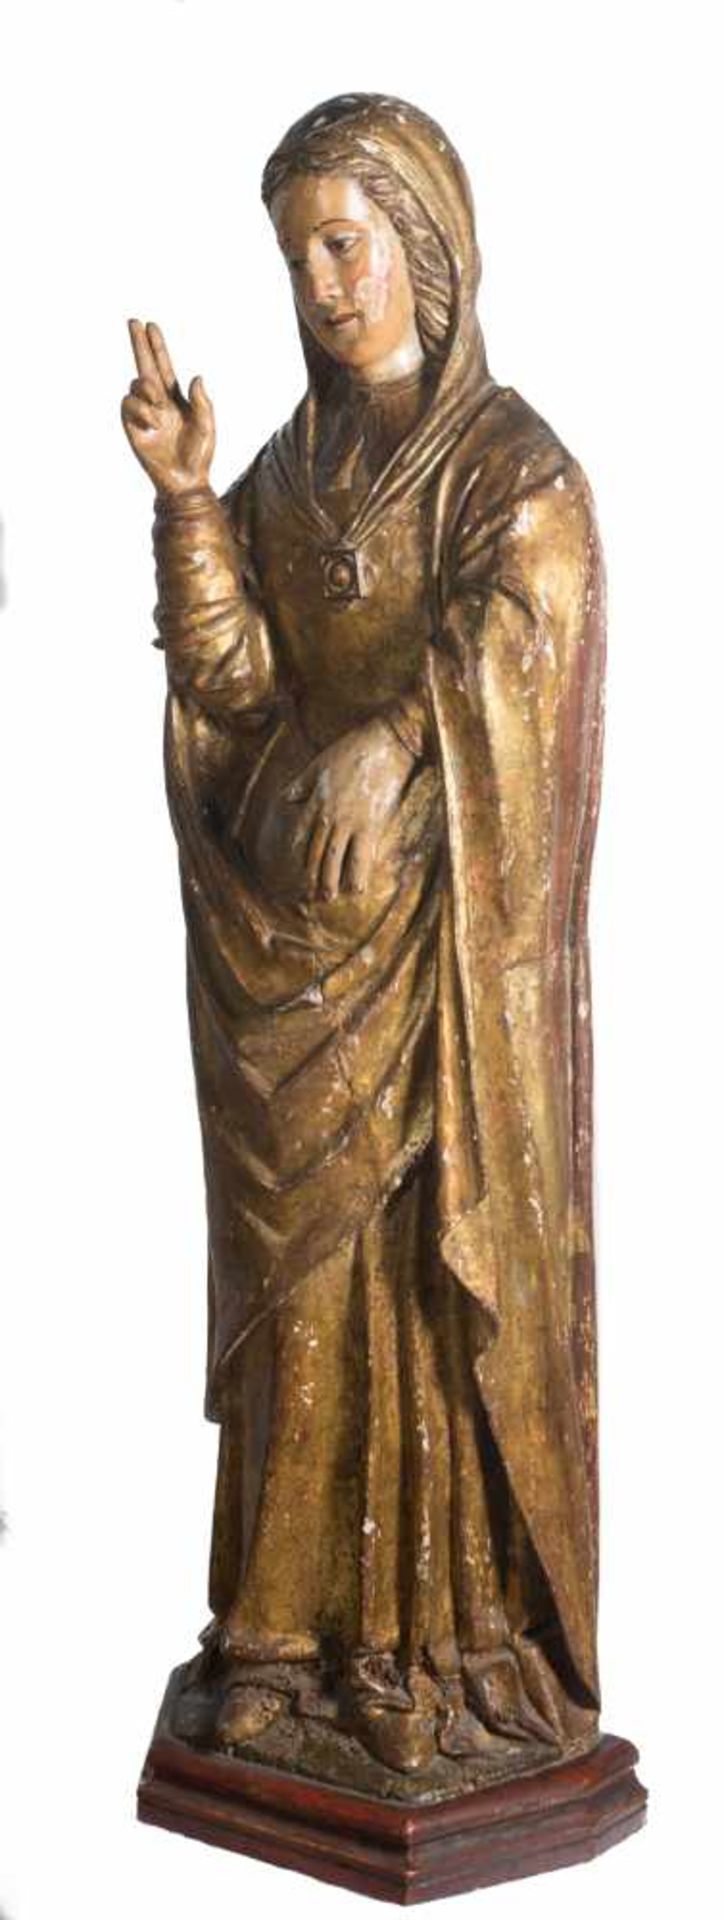 "Virgin of the Annunciation” Carved and gilded wooden sculpture. Catalan School. Girona. Gothic.